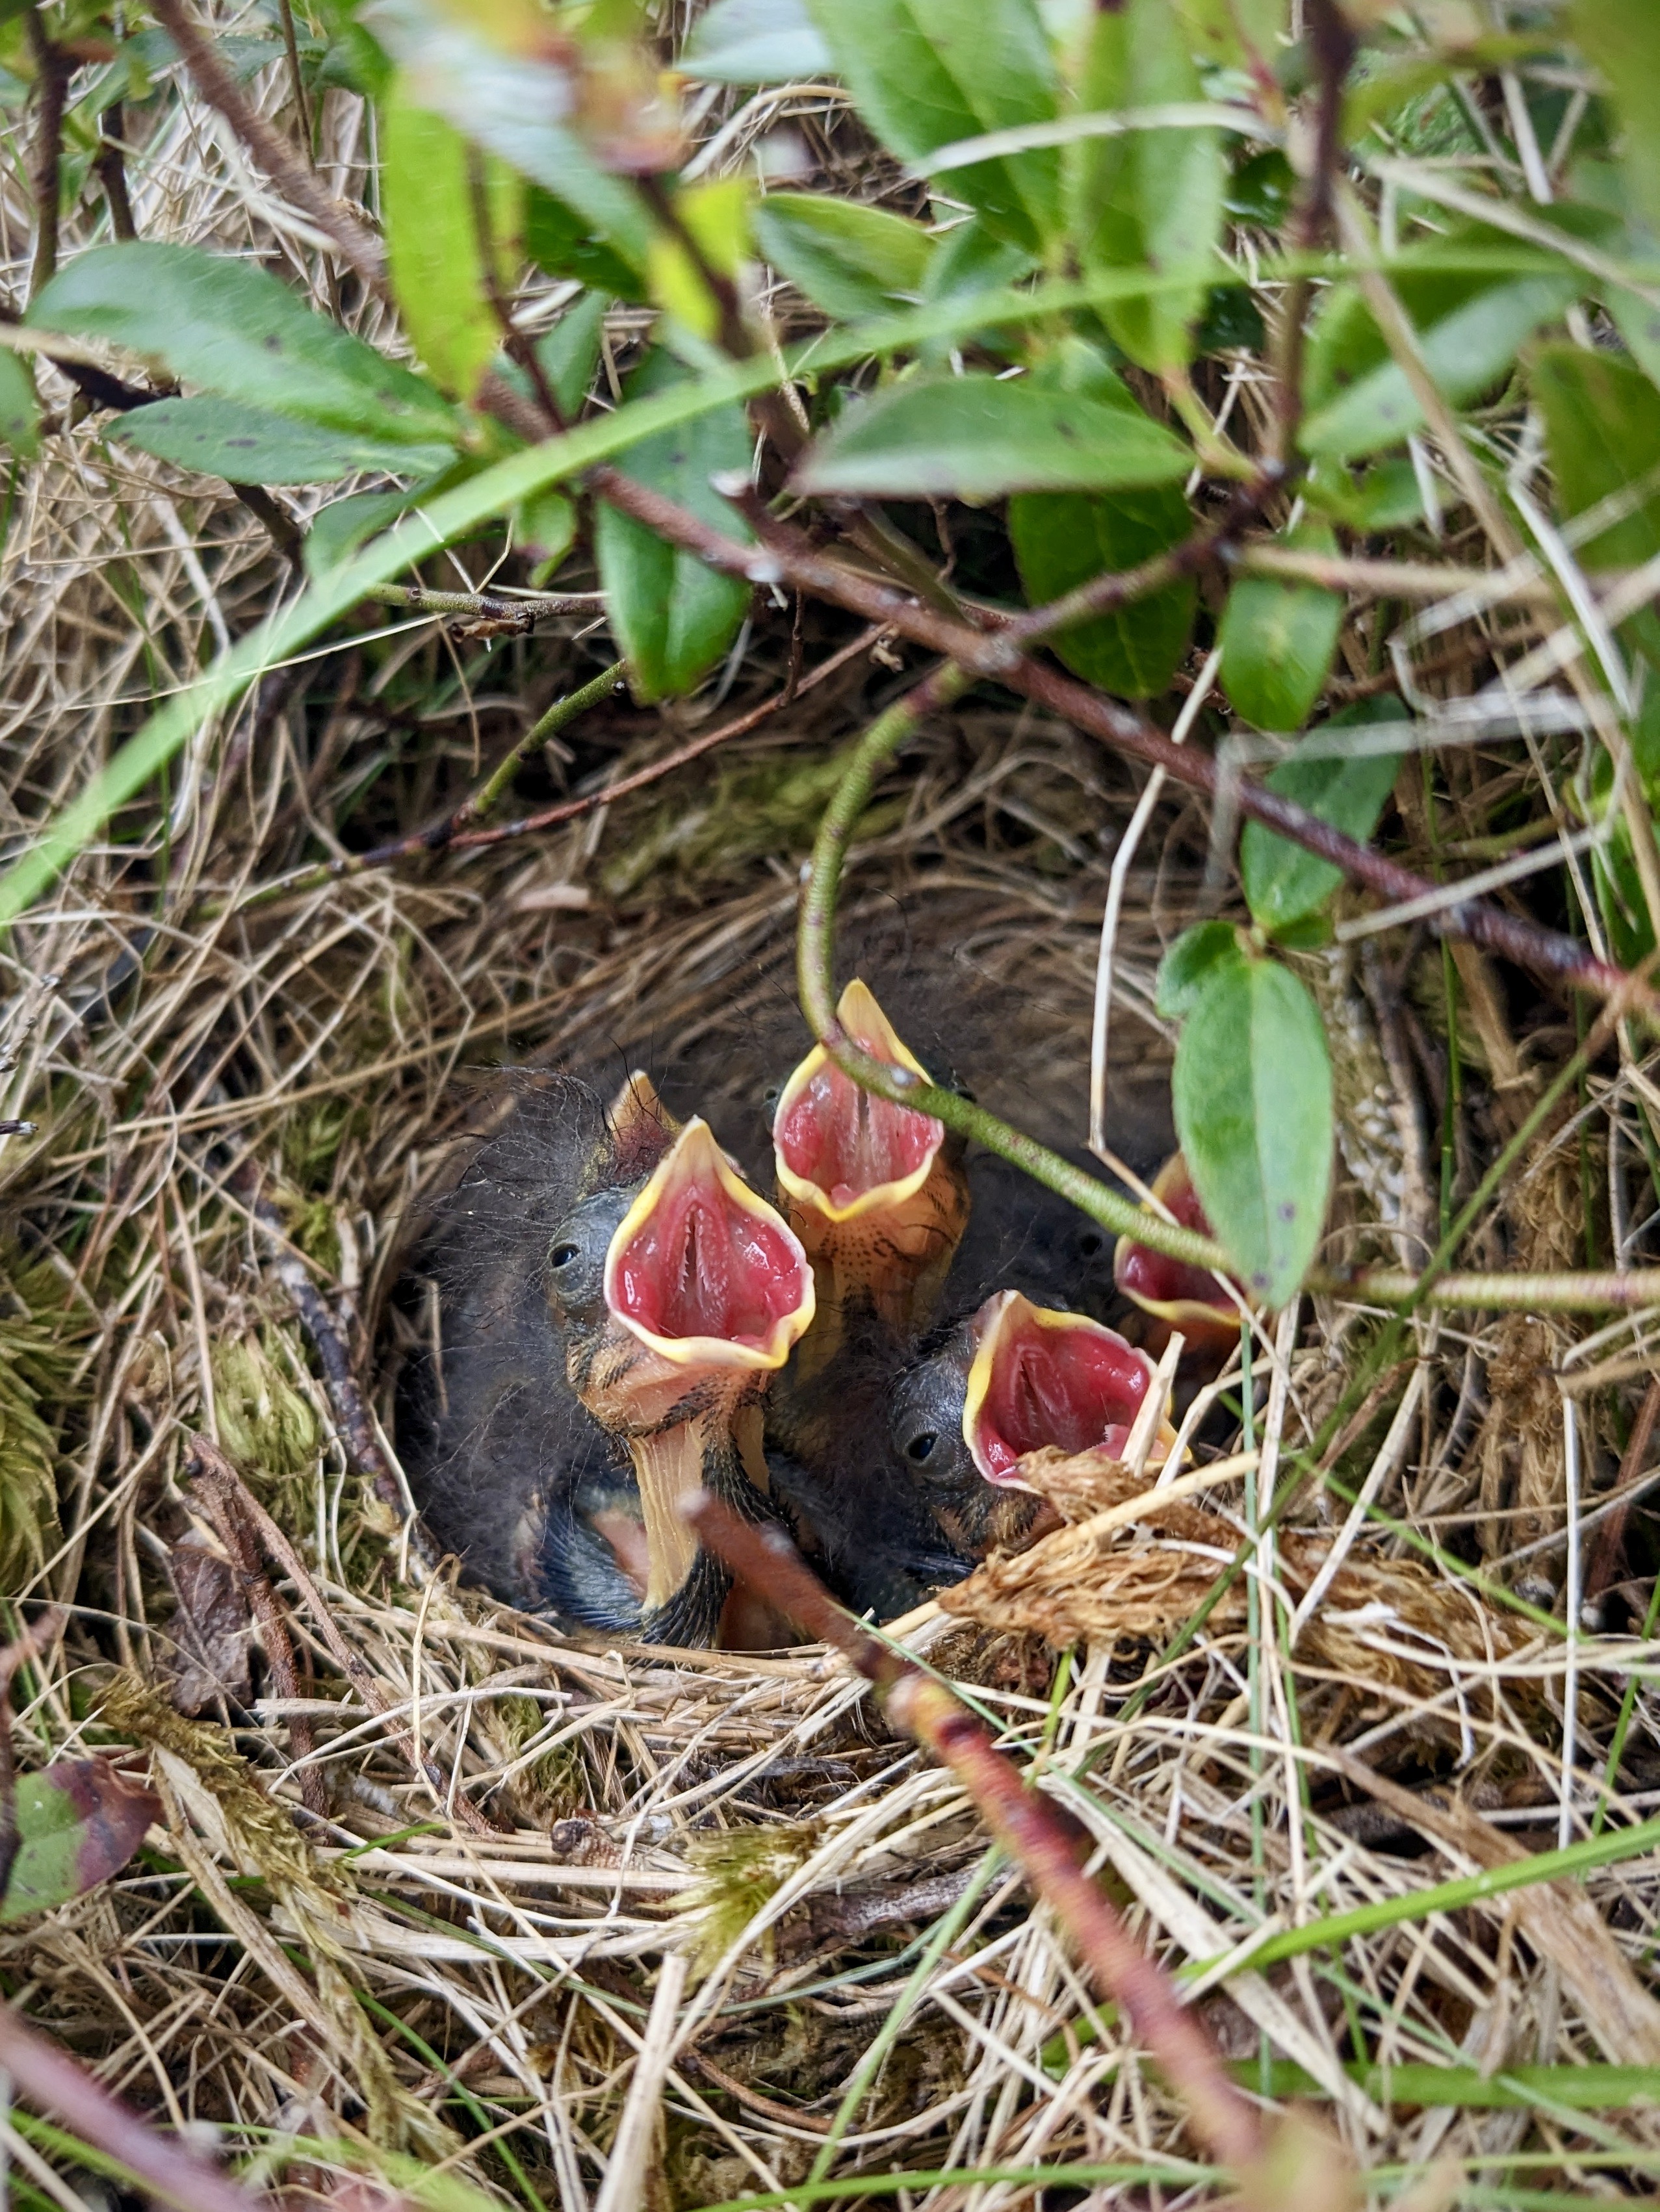 Four young Savannah sparrows in their nest with their mouths open